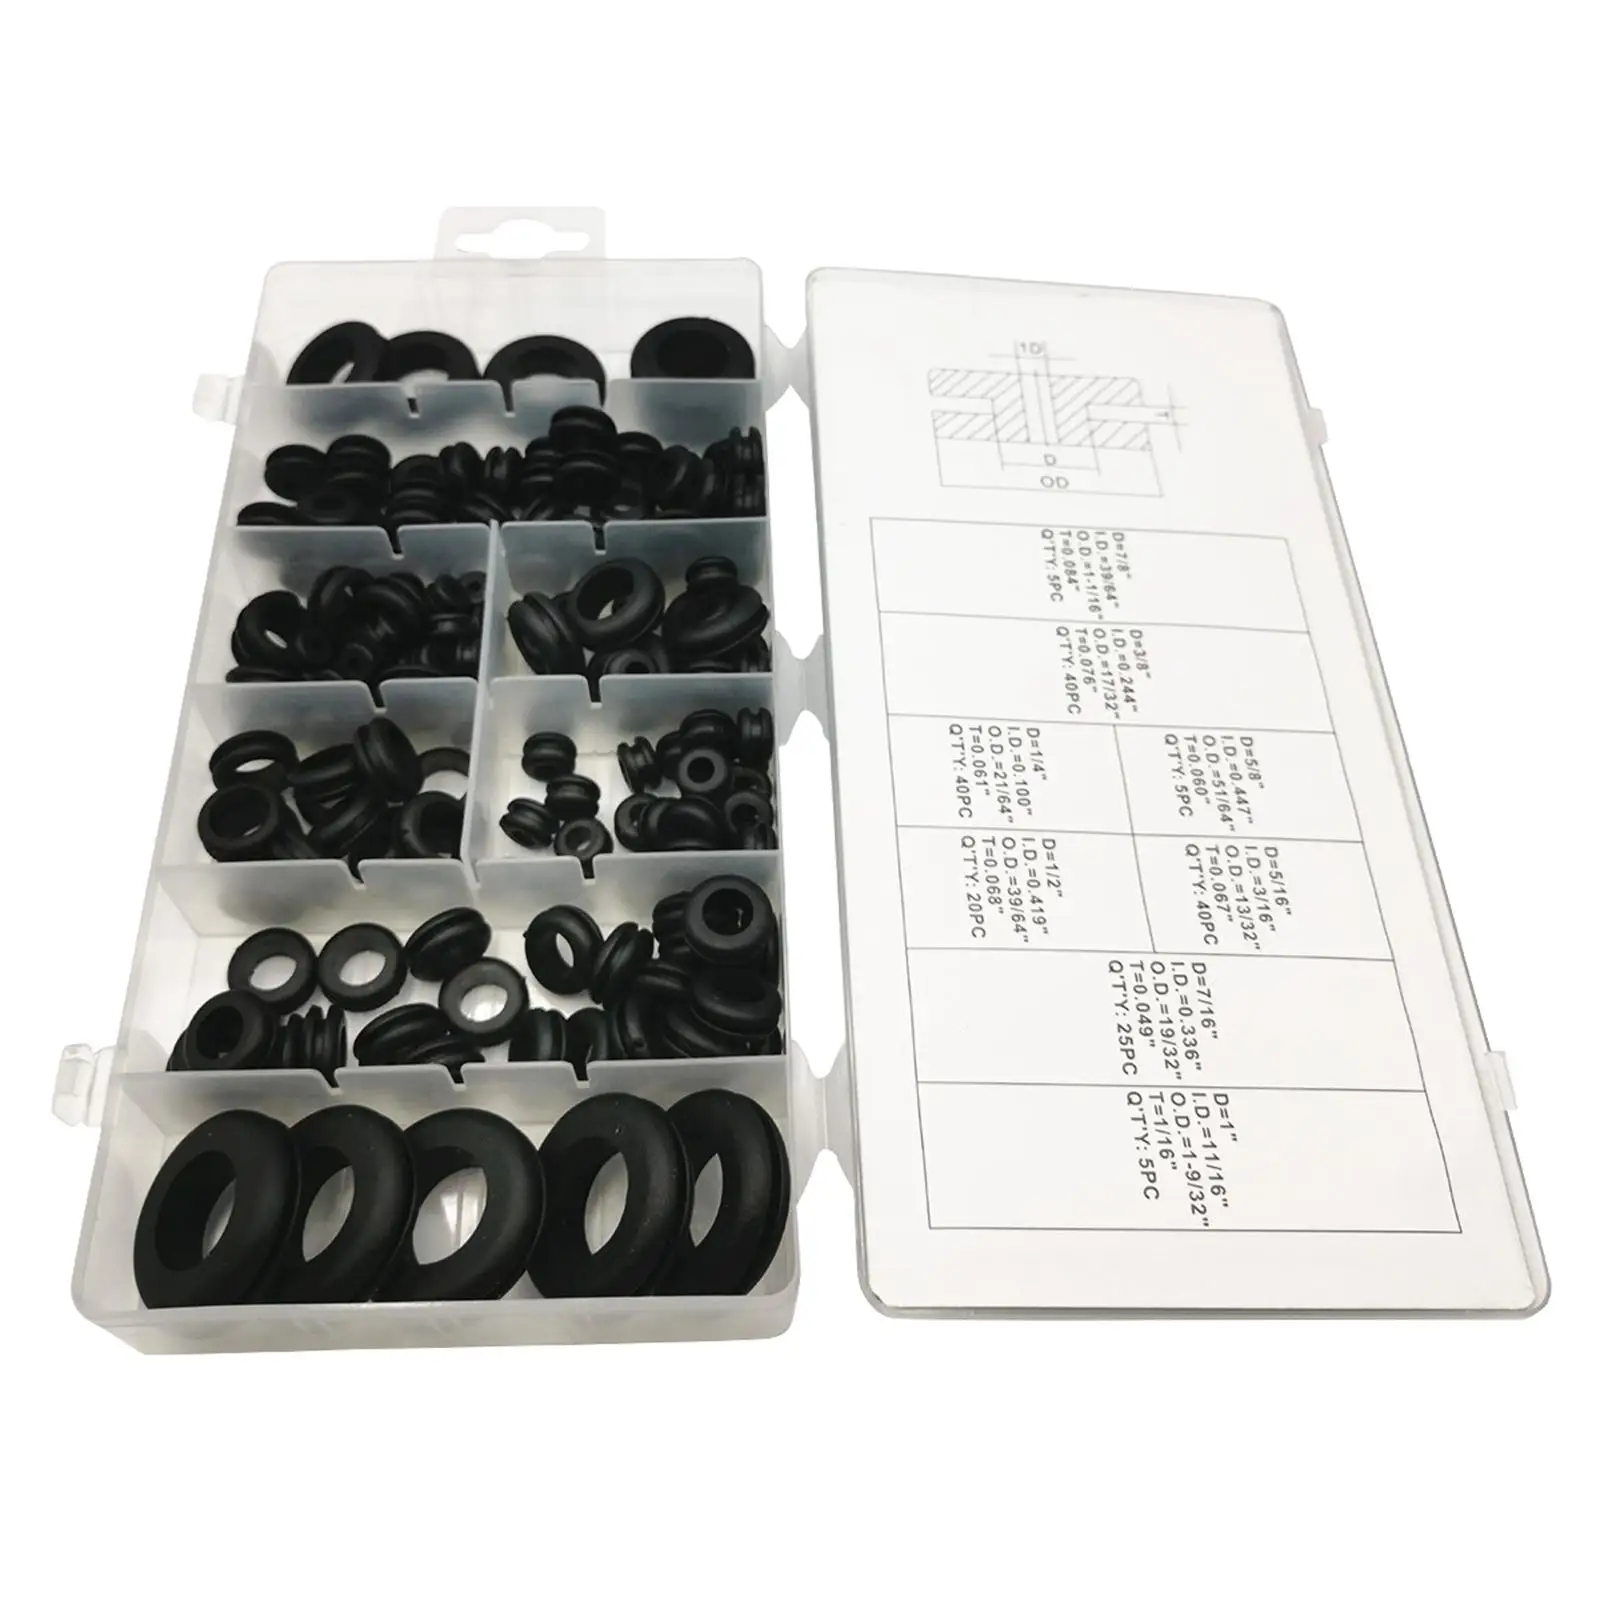 180 Pieces Rubber Grommets Assorted Sizes Ring Grommets Accessories for Plugs